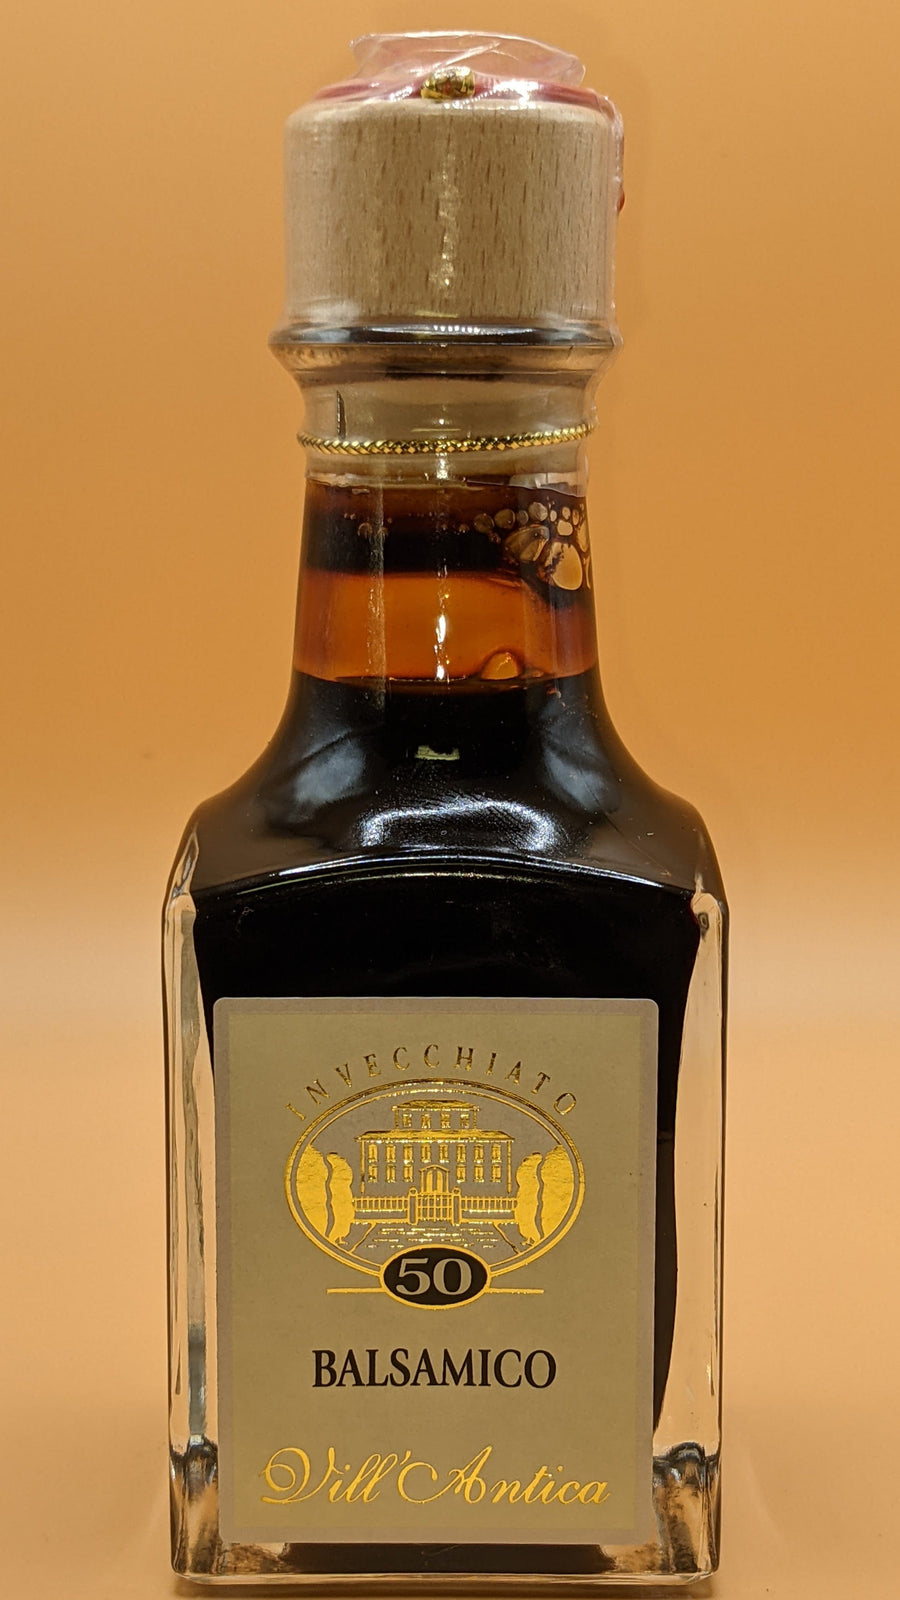 Vill'Antica-Balsamico-Italy-Aged-50-Years-Real-Gourmet-Food-FoodieVill_Antica-Balsamico-Aged-Collection-15-25-50-Years-best-Balsamic-Vinegar-Real-Gourmet-food-Foodie-top-Balsamic-Vinegar